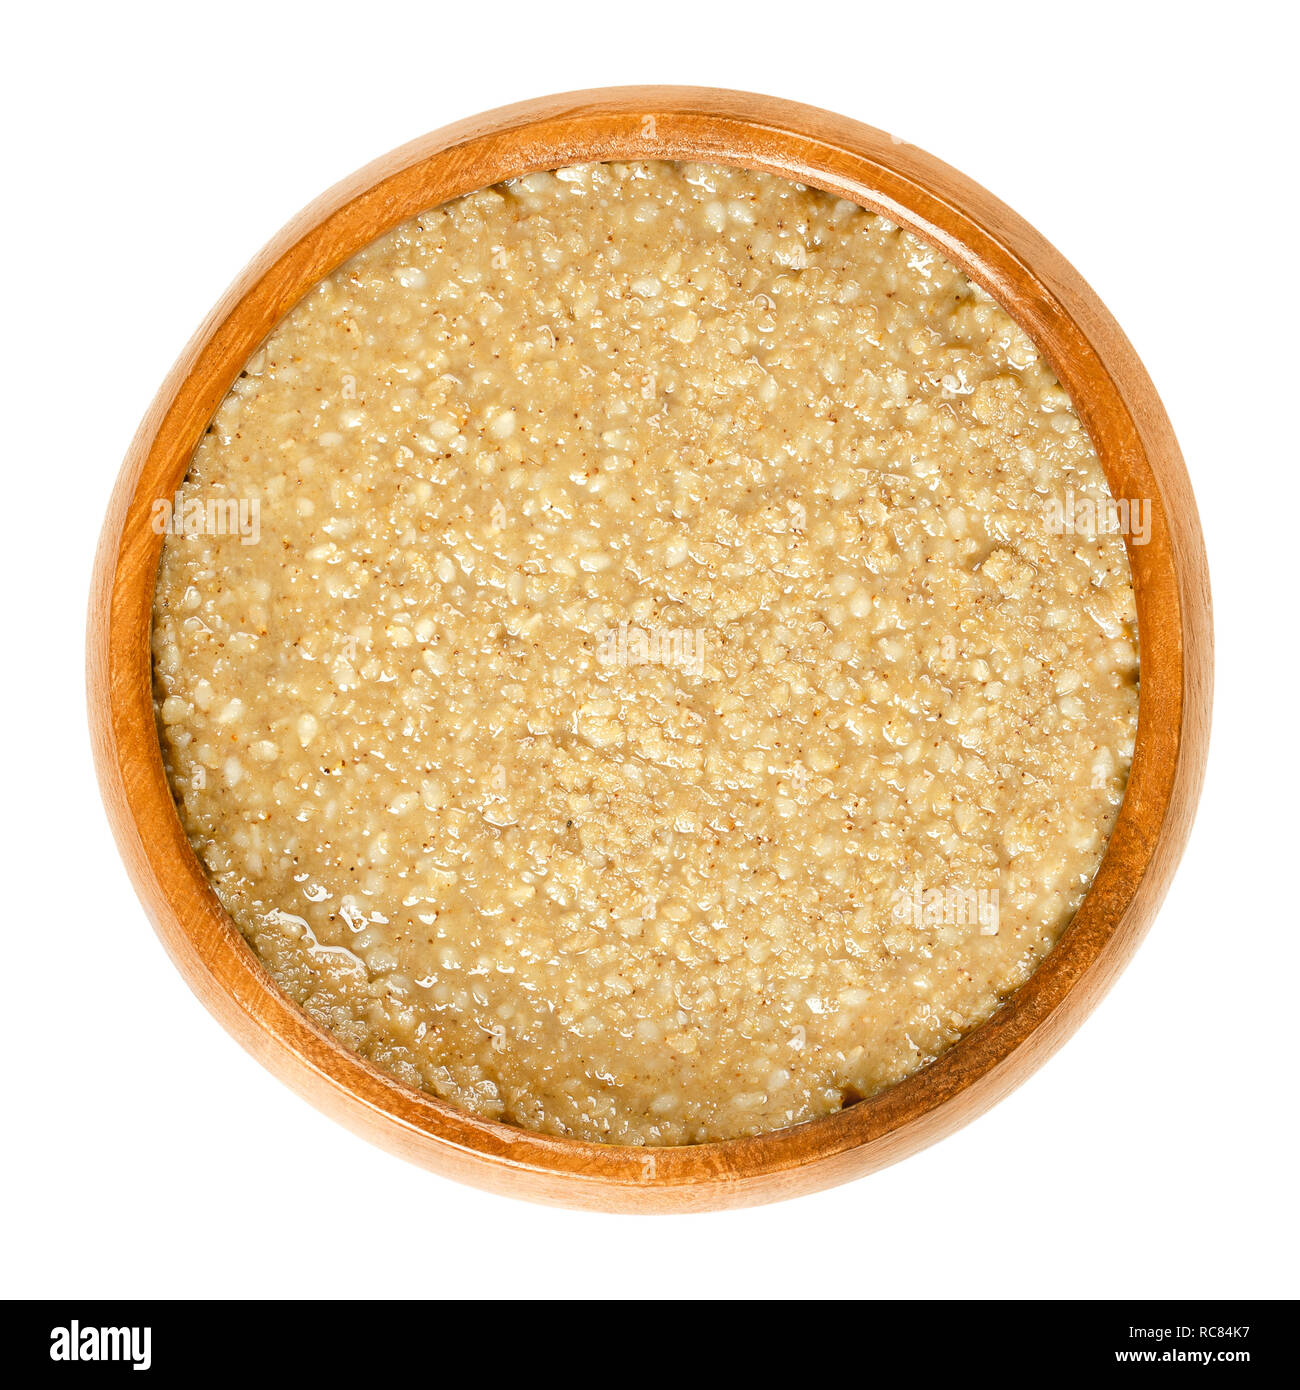 Homemade Tahini Sesame Paste In Wooden Bowl Brown Condiment Made Of Ground Hulled Sesame Seeds Dip Or Ingredient In Hummus Baba Ghanoush Halva Stock Photo Alamy,Nintendo Wii Games For Kids